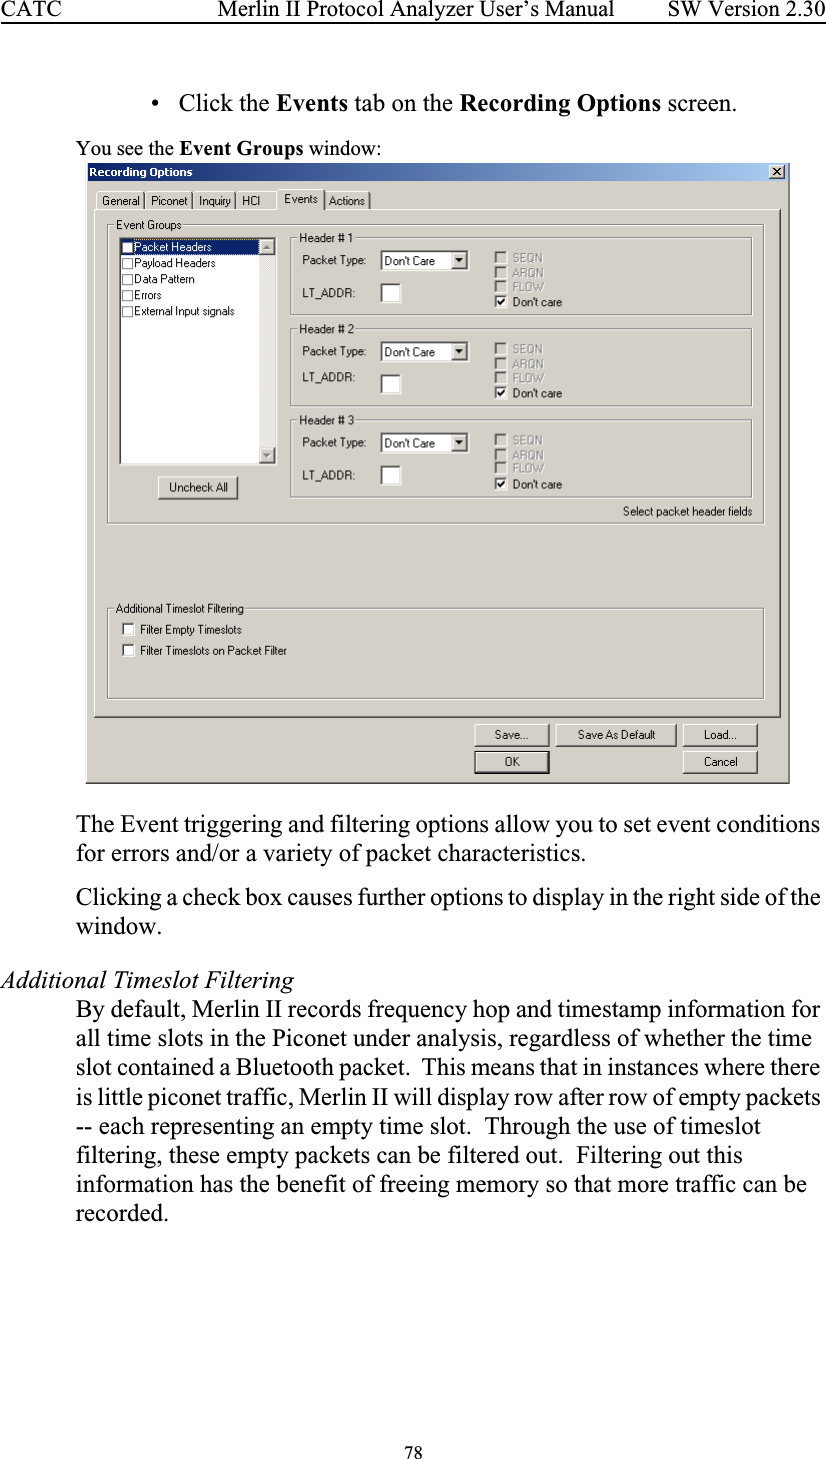 78 Merlin II Protocol Analyzer User’s ManualCATC SW Version 2.30• Click the Events tab on the Recording Options screen.You see the Event Groups window:The Event triggering and filtering options allow you to set event conditions for errors and/or a variety of packet characteristics.  Clicking a check box causes further options to display in the right side of the window.Additional Timeslot FilteringBy default, Merlin II records frequency hop and timestamp information for all time slots in the Piconet under analysis, regardless of whether the time slot contained a Bluetooth packet.  This means that in instances where there is little piconet traffic, Merlin II will display row after row of empty packets -- each representing an empty time slot.  Through the use of timeslot filtering, these empty packets can be filtered out.  Filtering out this information has the benefit of freeing memory so that more traffic can be recorded.